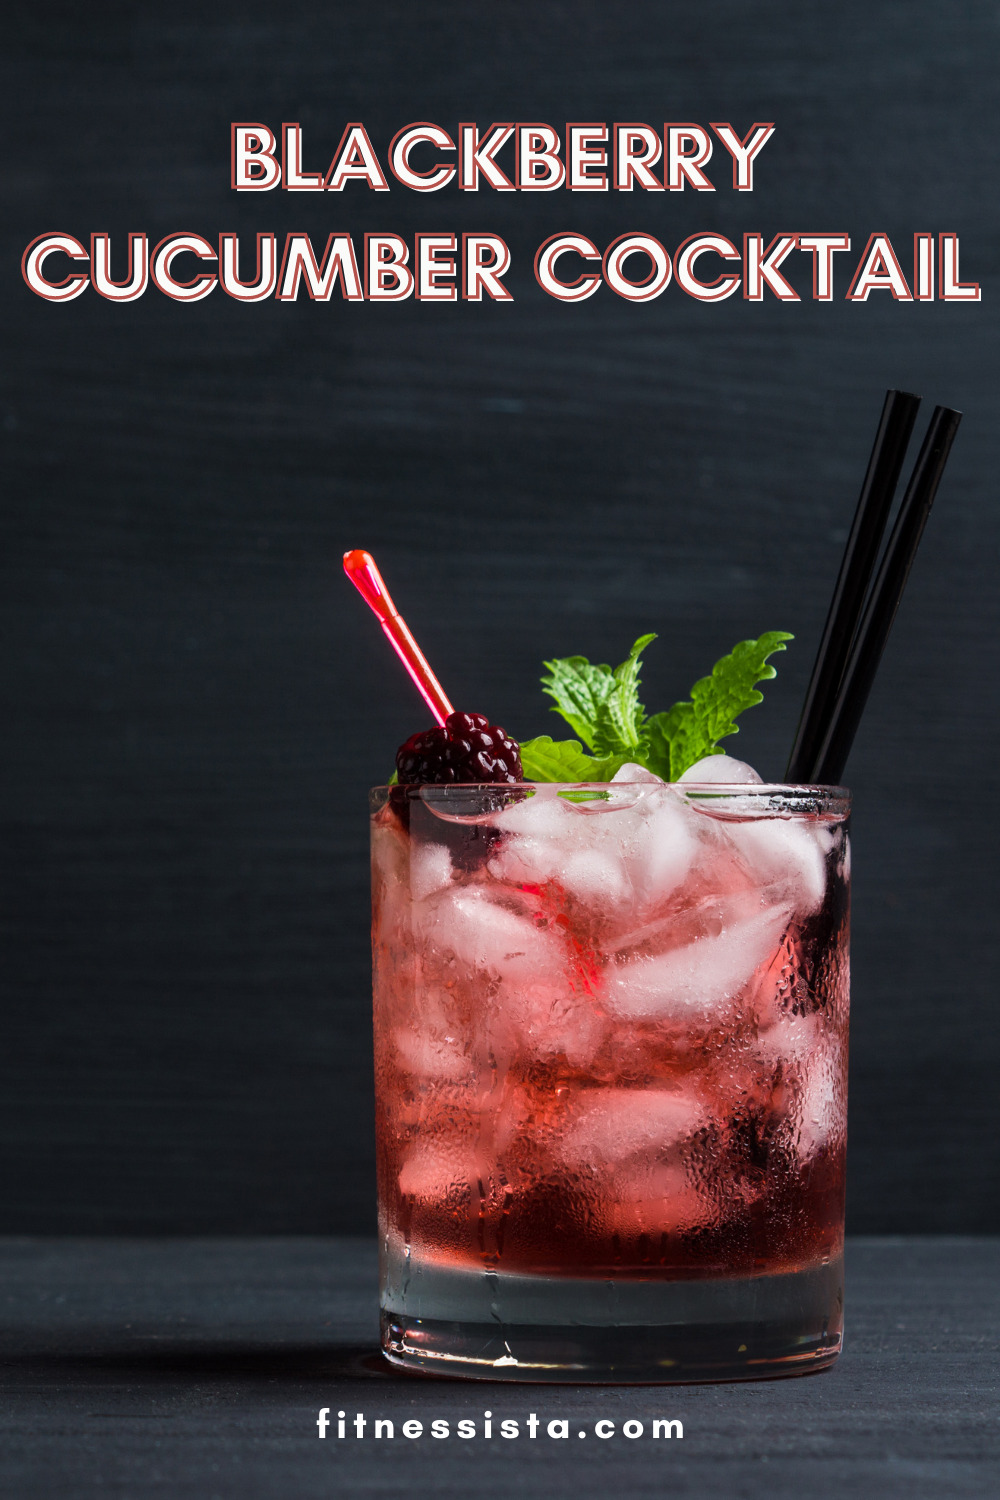 Blackberry Cucumber Cocktail – The Fitnessista